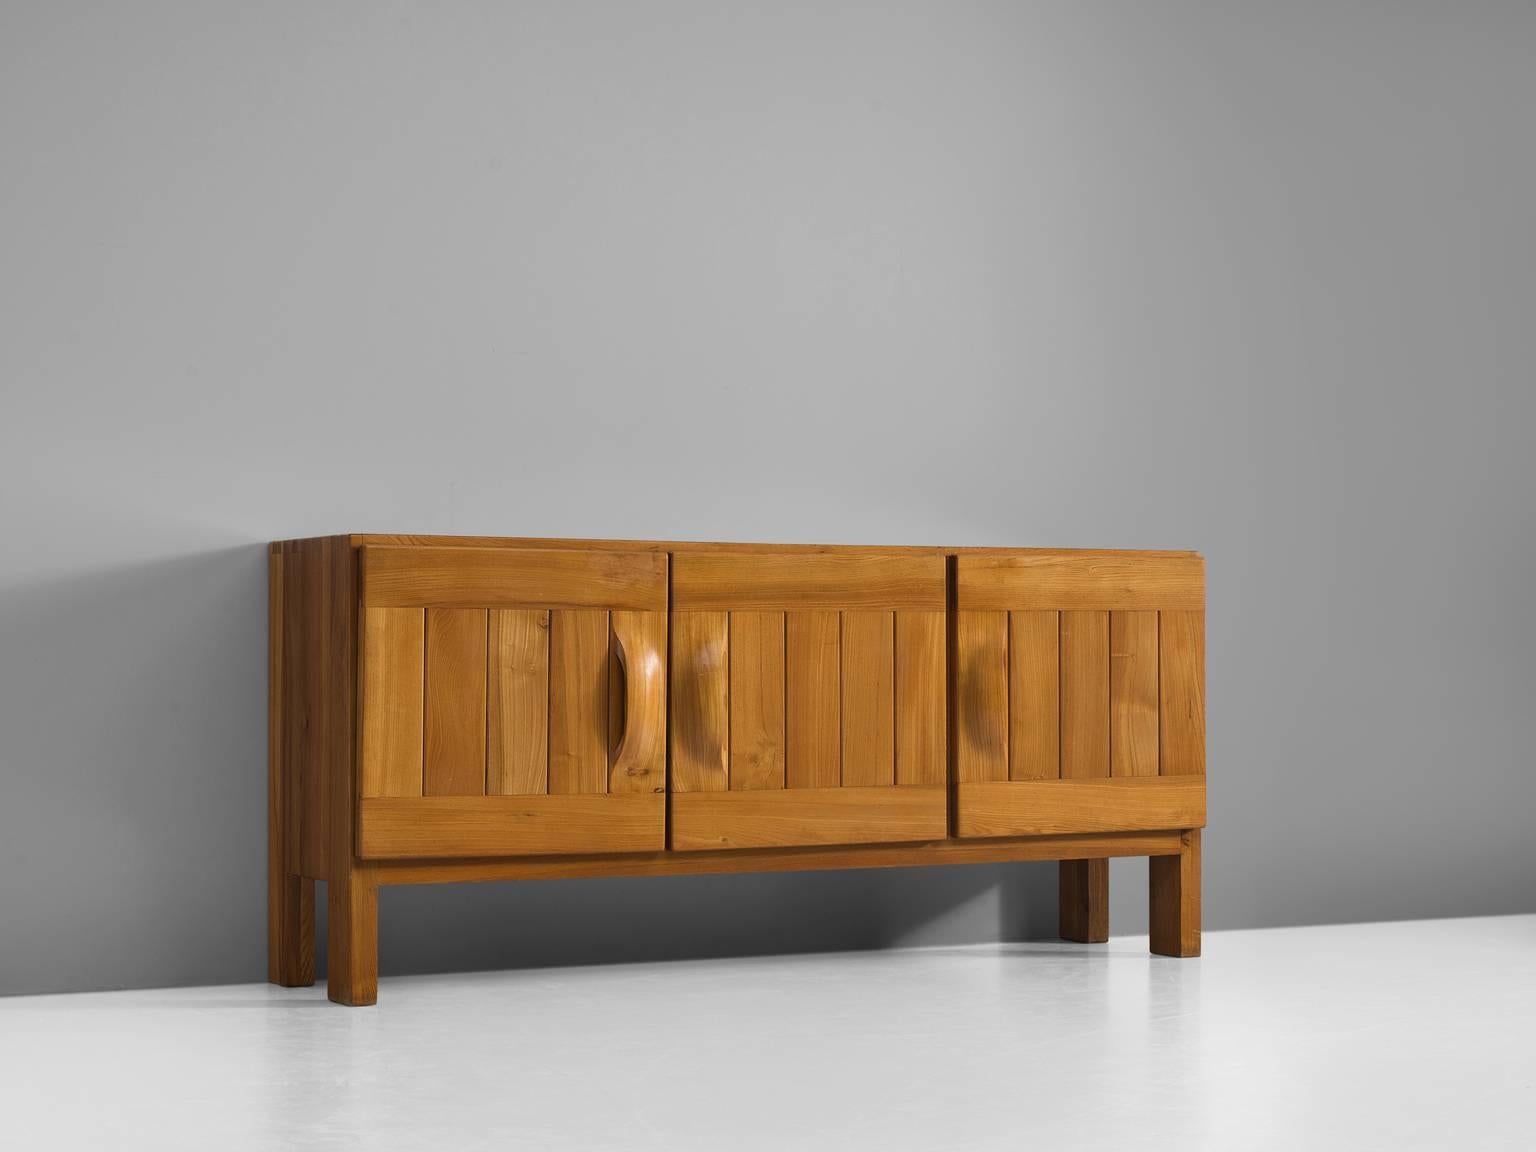 Credenza by Maison Regain, elm, France, 1960s.

This exquisite credenza combines a simplified yet complex design combined with nifty, solid construction details that characterize Maison Regain's designs. The three well balanced, sturdy doors are